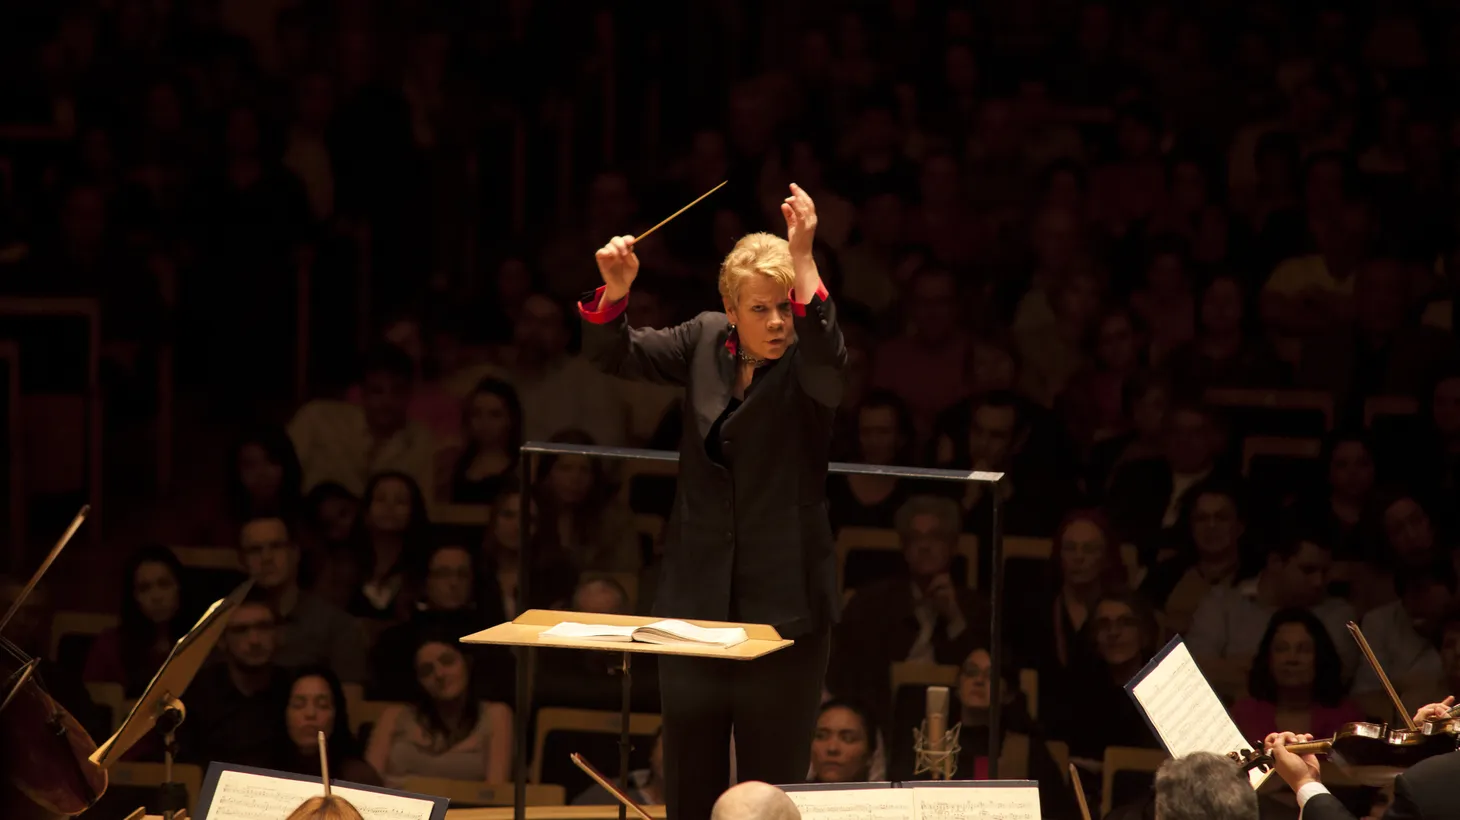 When Marin Alsop was just a child, she saw a concert conducted by Leonard Bernstein and was inspired to become a conductor herself. She eventually became the first woman to head a major American orchestra.